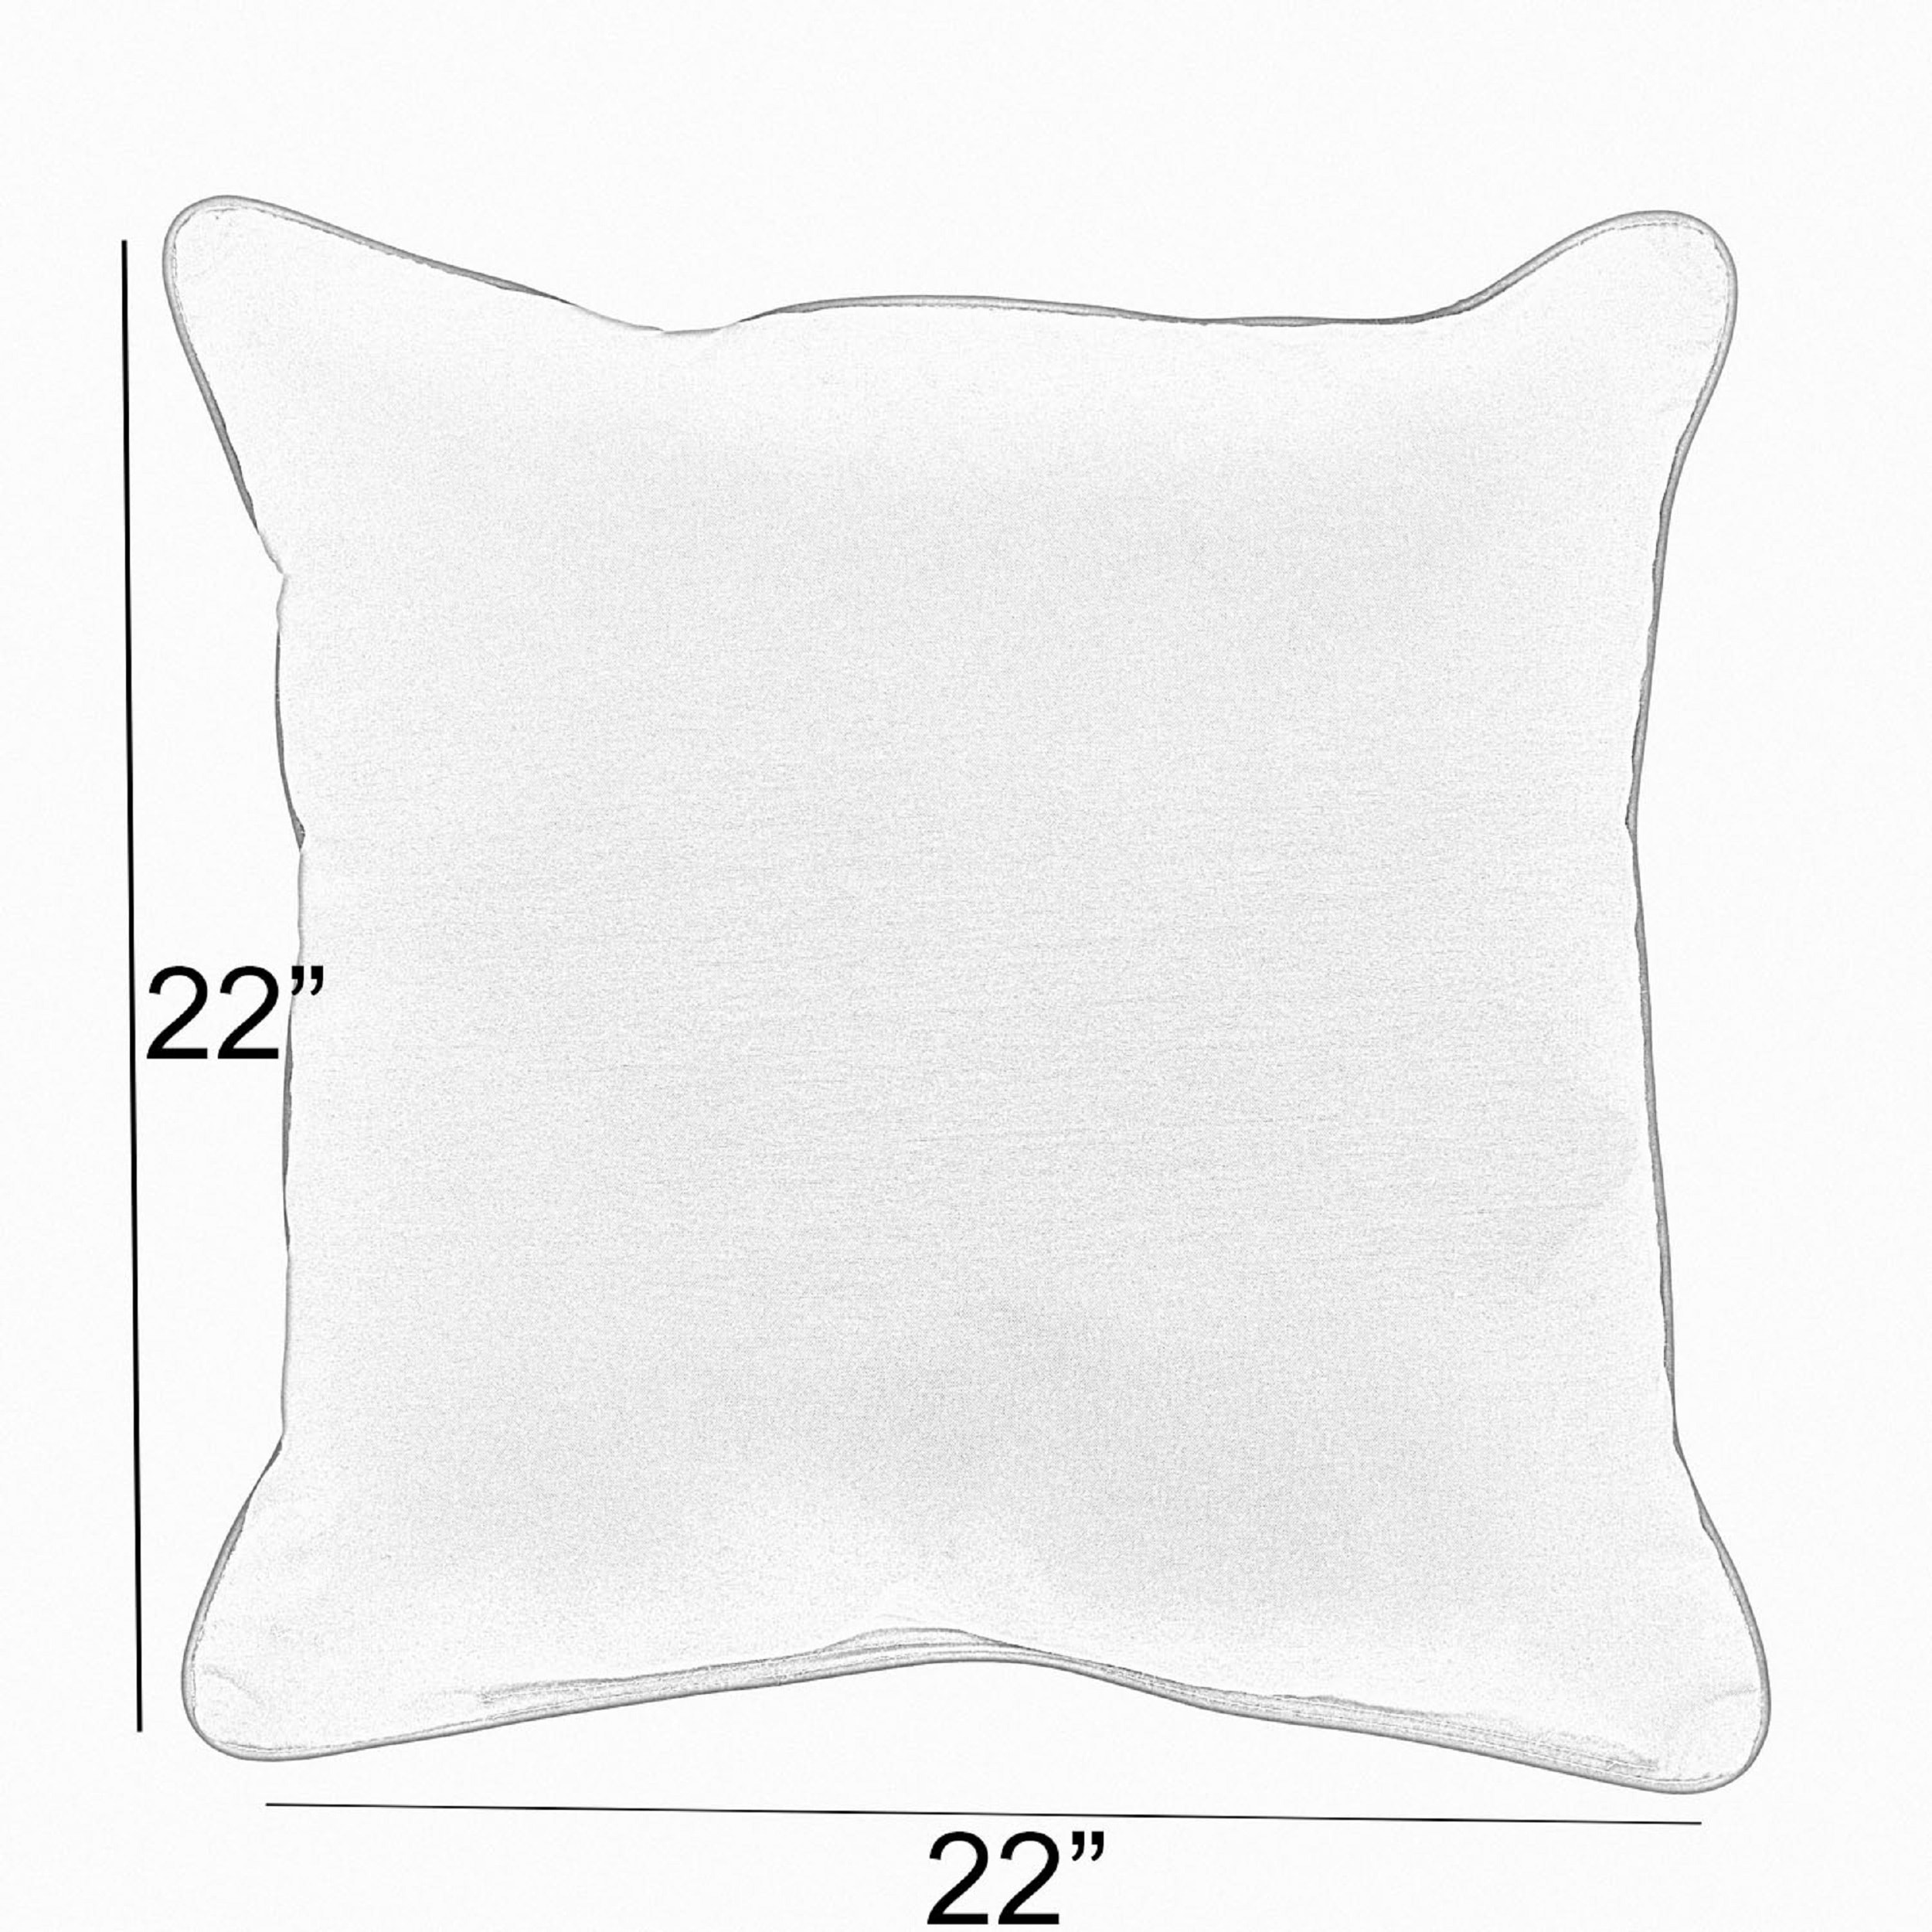 Palms Blue and White Square Indoor/Outdoor Knife Edge Pillows (Set of 2) by  Havenside Home - On Sale - Bed Bath & Beyond - 30417980